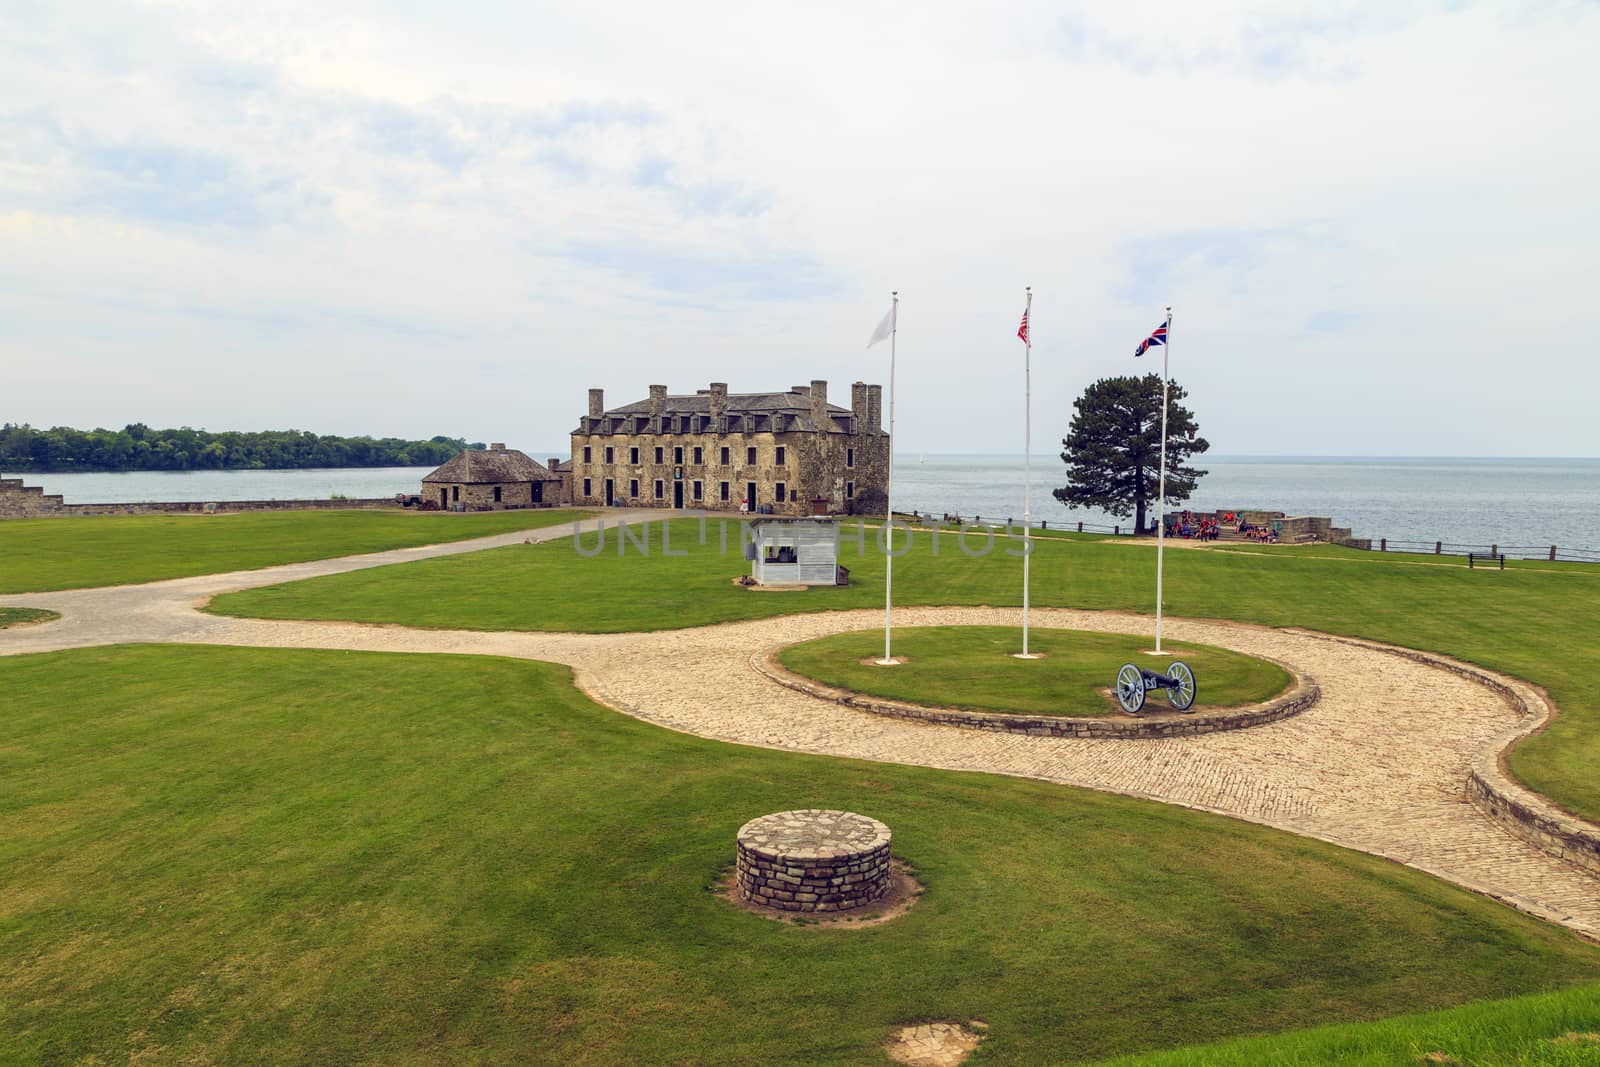 The french castle of Fort Niagara sits on the shore of Lake Ontario and the Niagara River. 